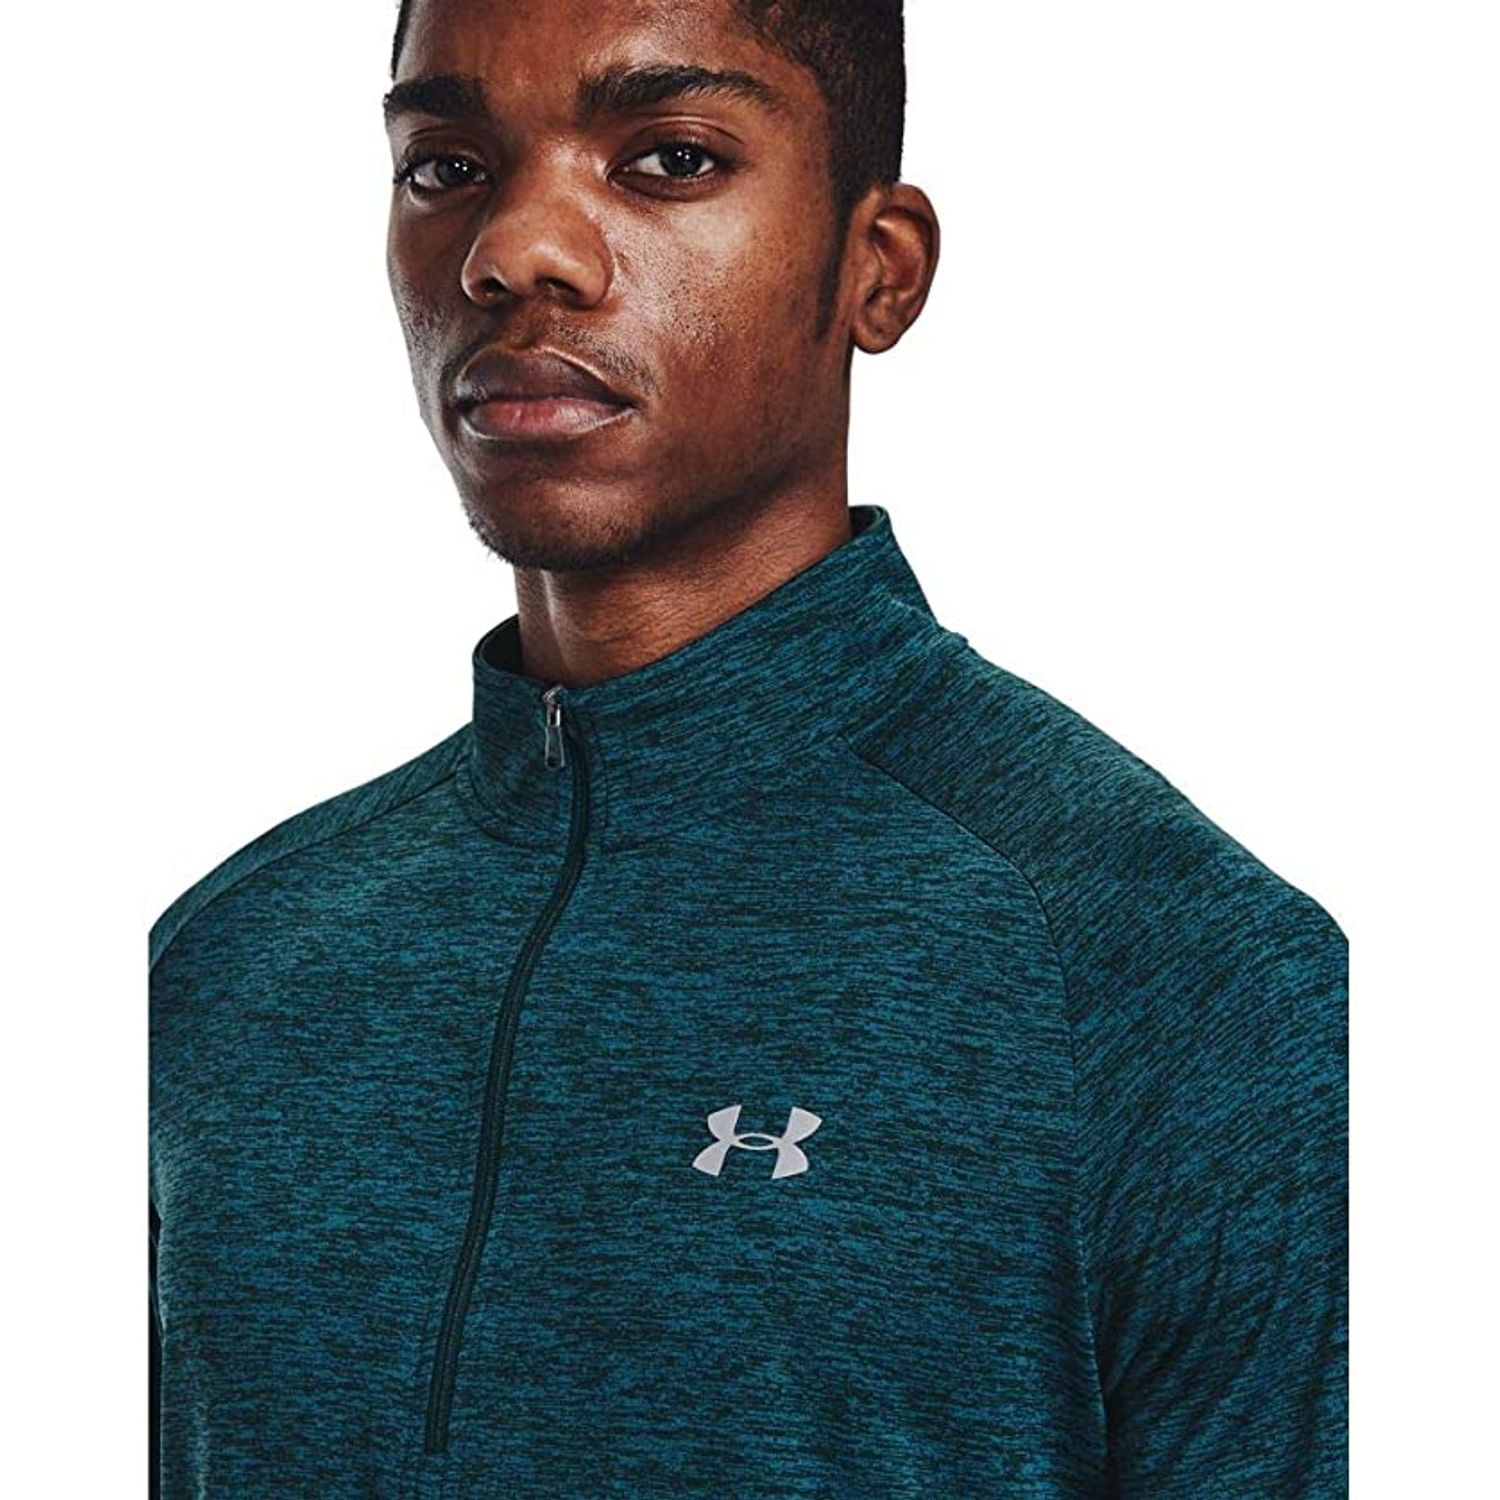 UNDER ARMOUR TECH HALF ZIP TOP - LAVA – SGN CLOTHING